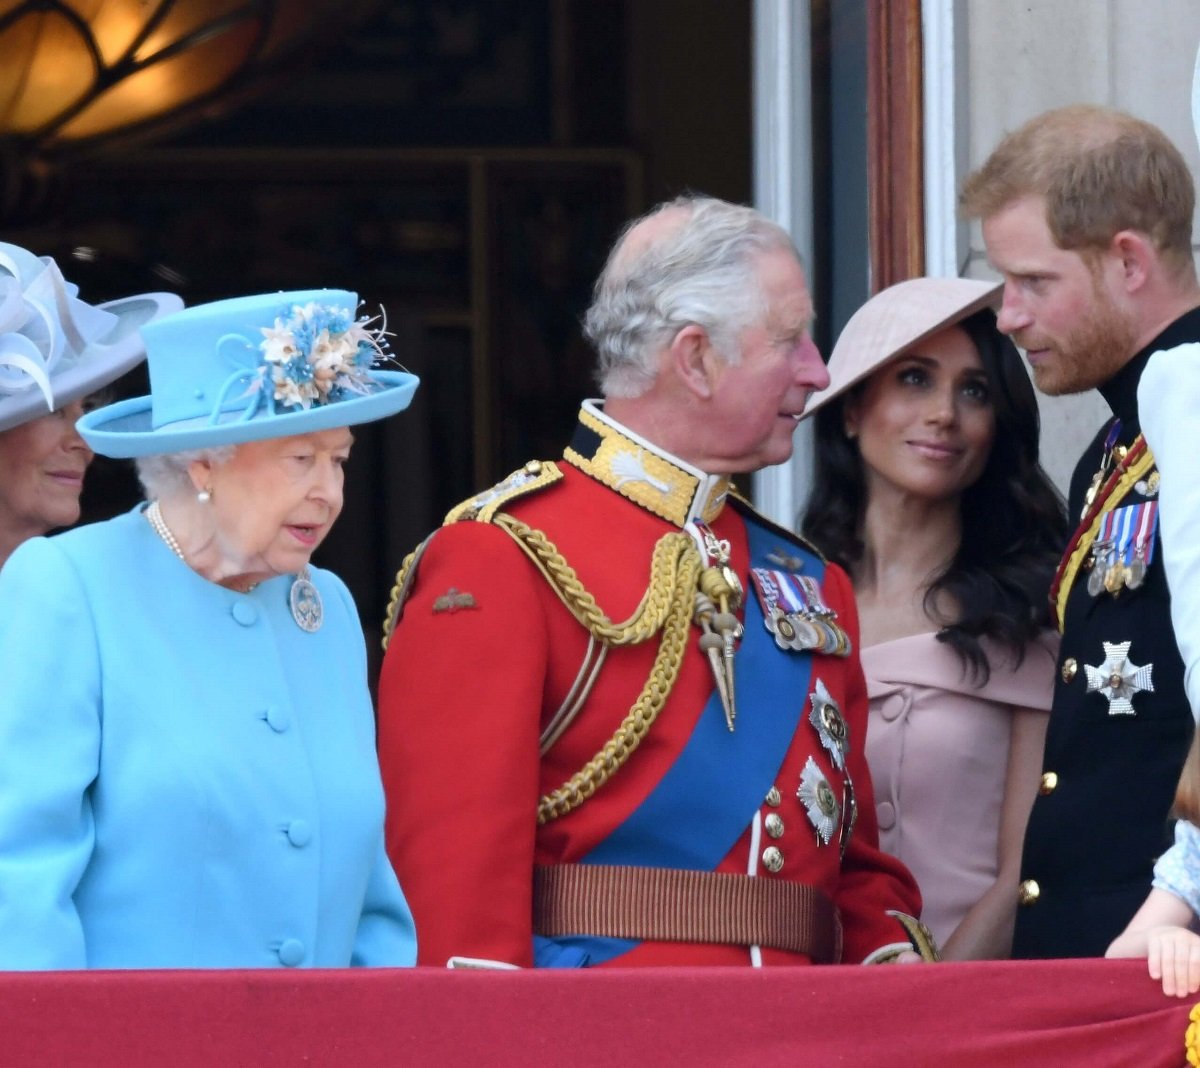 Queen Elizabeth II, then-Prince Charles, Meghan Markle, and Prince Harry standing on the Buckingham Palace balcony during Trooping the Colour